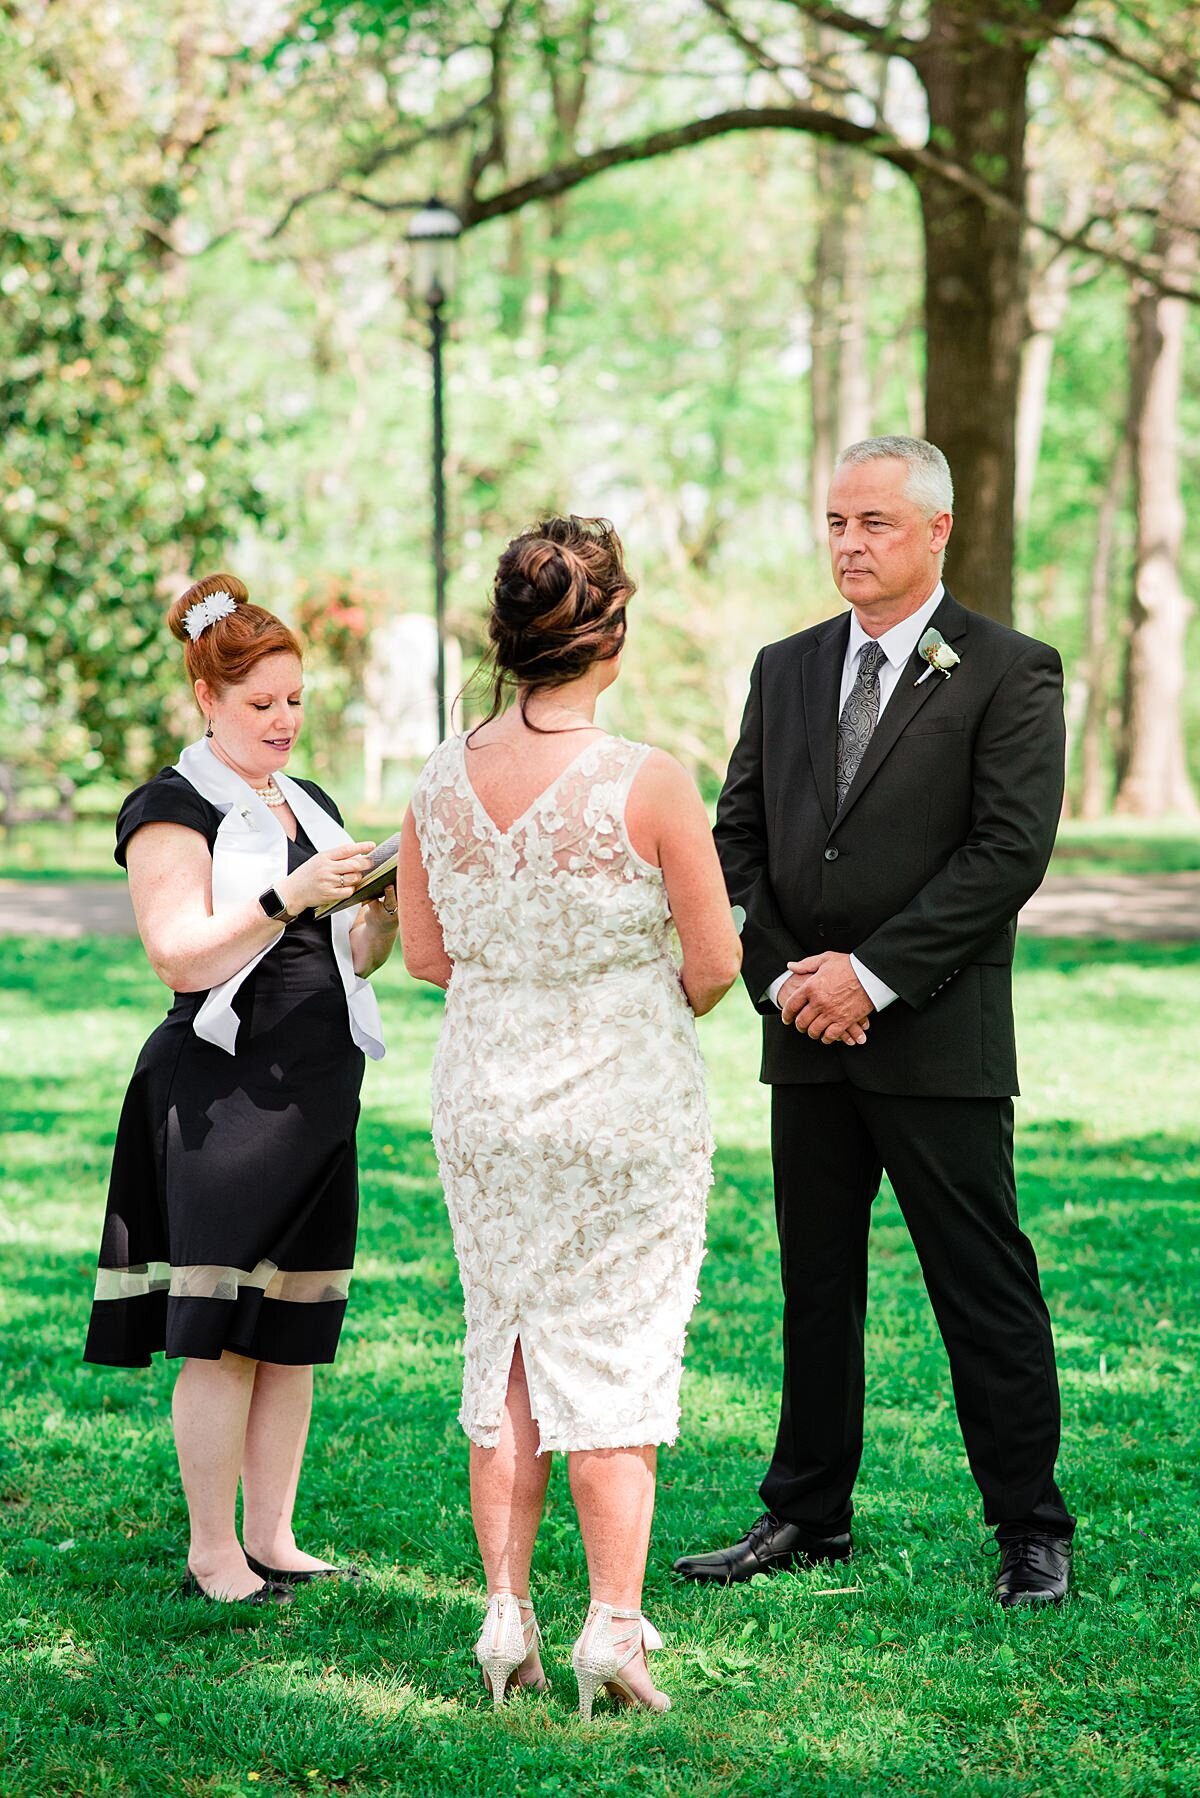 The officiant stands before the bride and groom conducting the wedding ceremony. She is wearing a black dress and a white officiant sash that blows in the breeze.  She has a small gray flower in her hair which is up in a structured bun. The bride is facing away from the camera. She is wearing a sleeveless knee length white lace sheath dress and stilettos with ankle bows. The groom is looking at the bride with his hands clasped in front of him. He is wearing a black suit with a white shirt and gray tie. HE has a white boutonniere on his lapel. They are standing in a green field with a lush wooded area behind them.